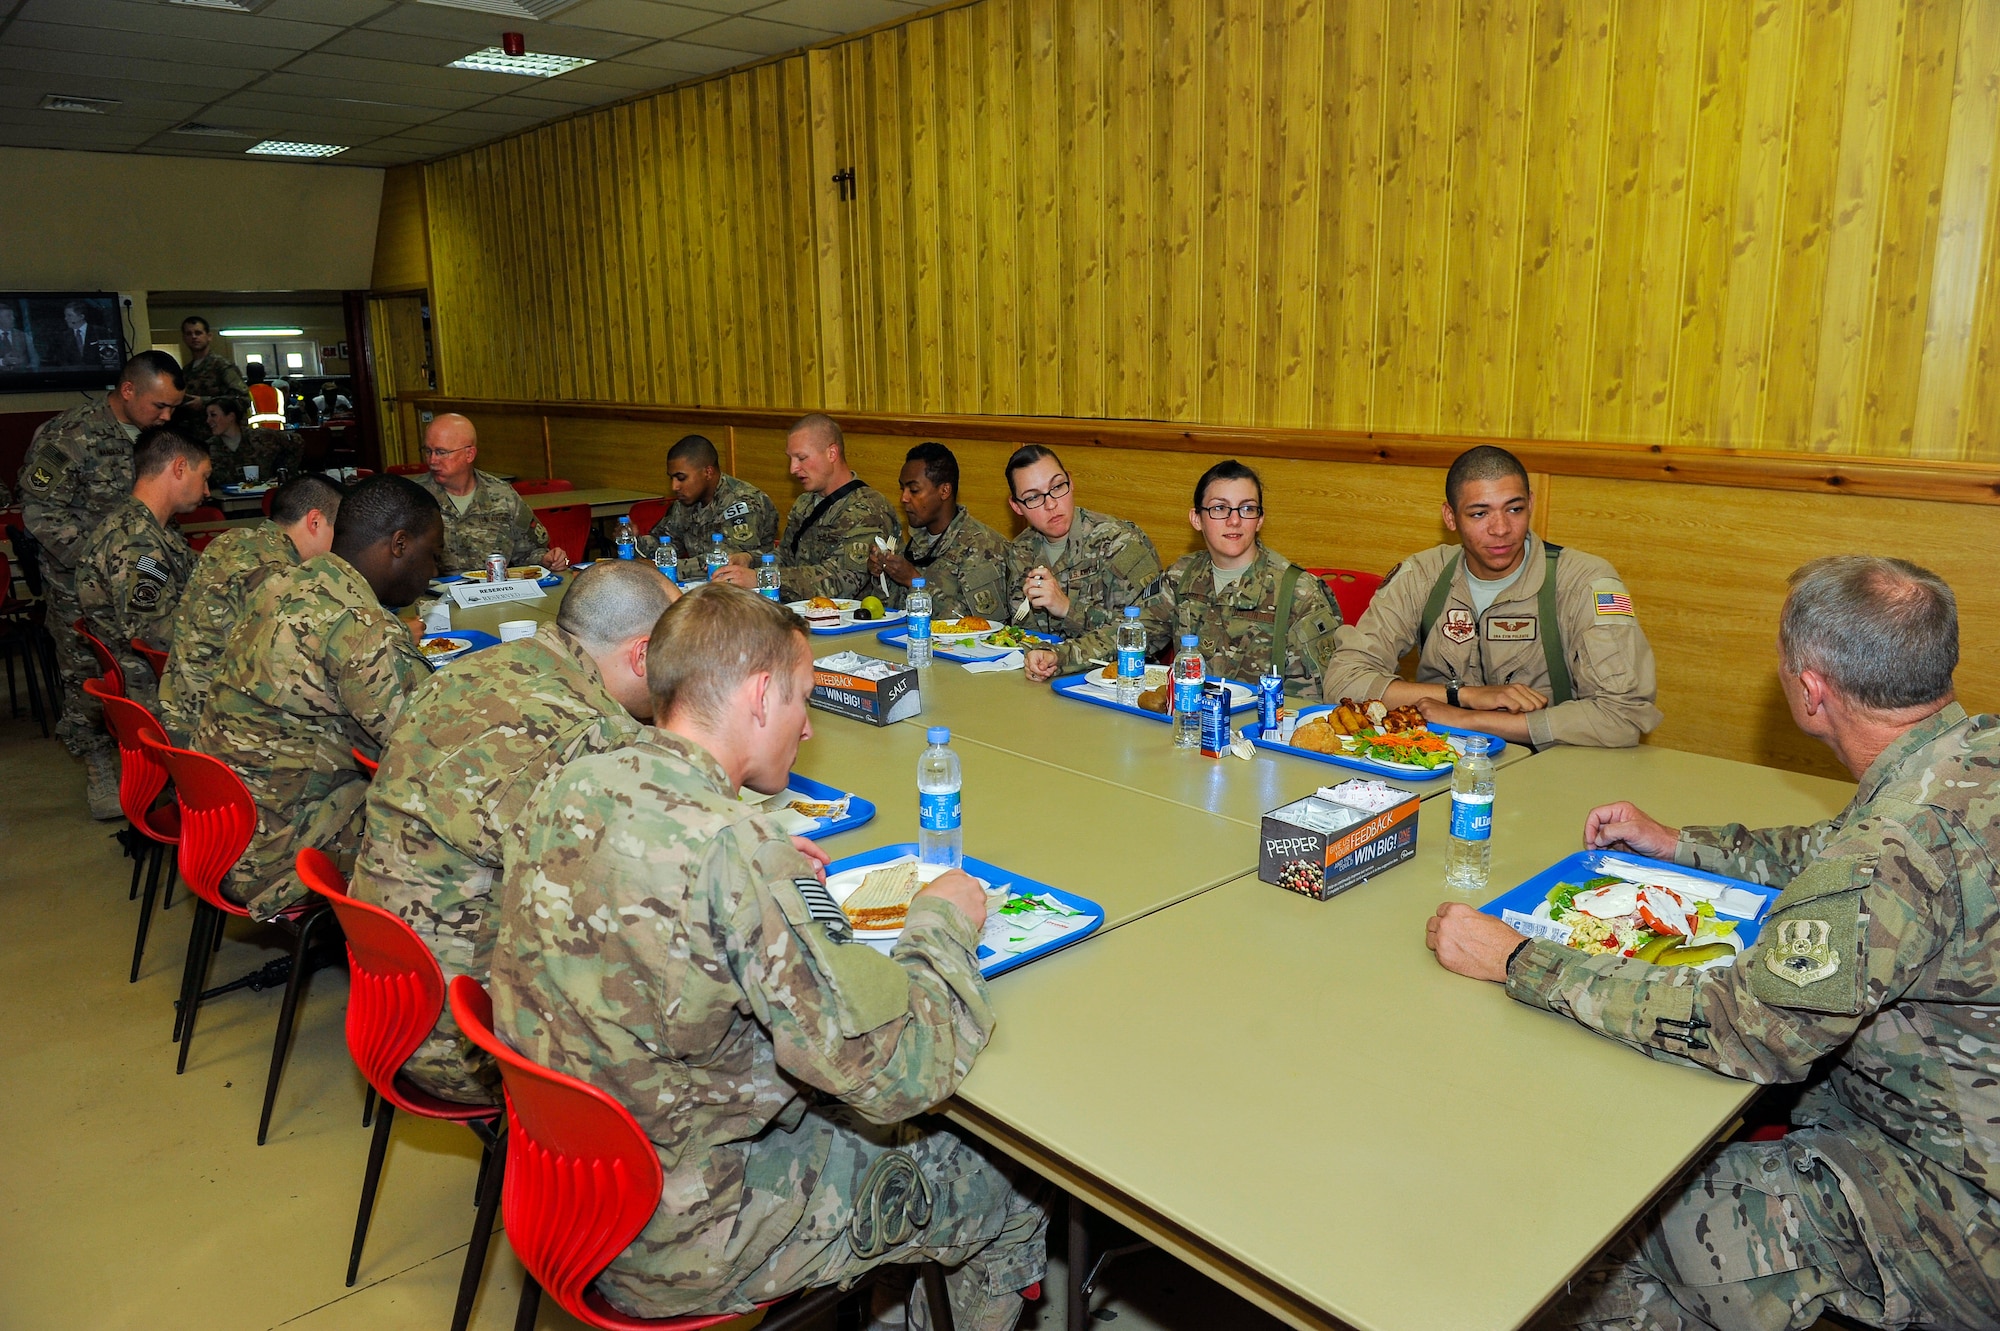 U.S. Air Force Brig. Gen. Mark D. Kelly, 455th Air Expeditionary Wing commander, and Chief Master Sgt. Jeffery Brown, 455th AEW command chief, eat lunch with Airmen assigned to the 451st Air Expeditionary Group during a visit to Kandahar Airfield, Afghanistan, May 3, 2015.  The general along with the chief met with Airmen from across the group who provide intelligence, surveillance and reconnaissance, command and control, personnel recovery, and airborne datalink capabilities to commanders in the Afghanistan theater of operations. (U.S. Air Force photo by Maj. Tony Wickman/Released)